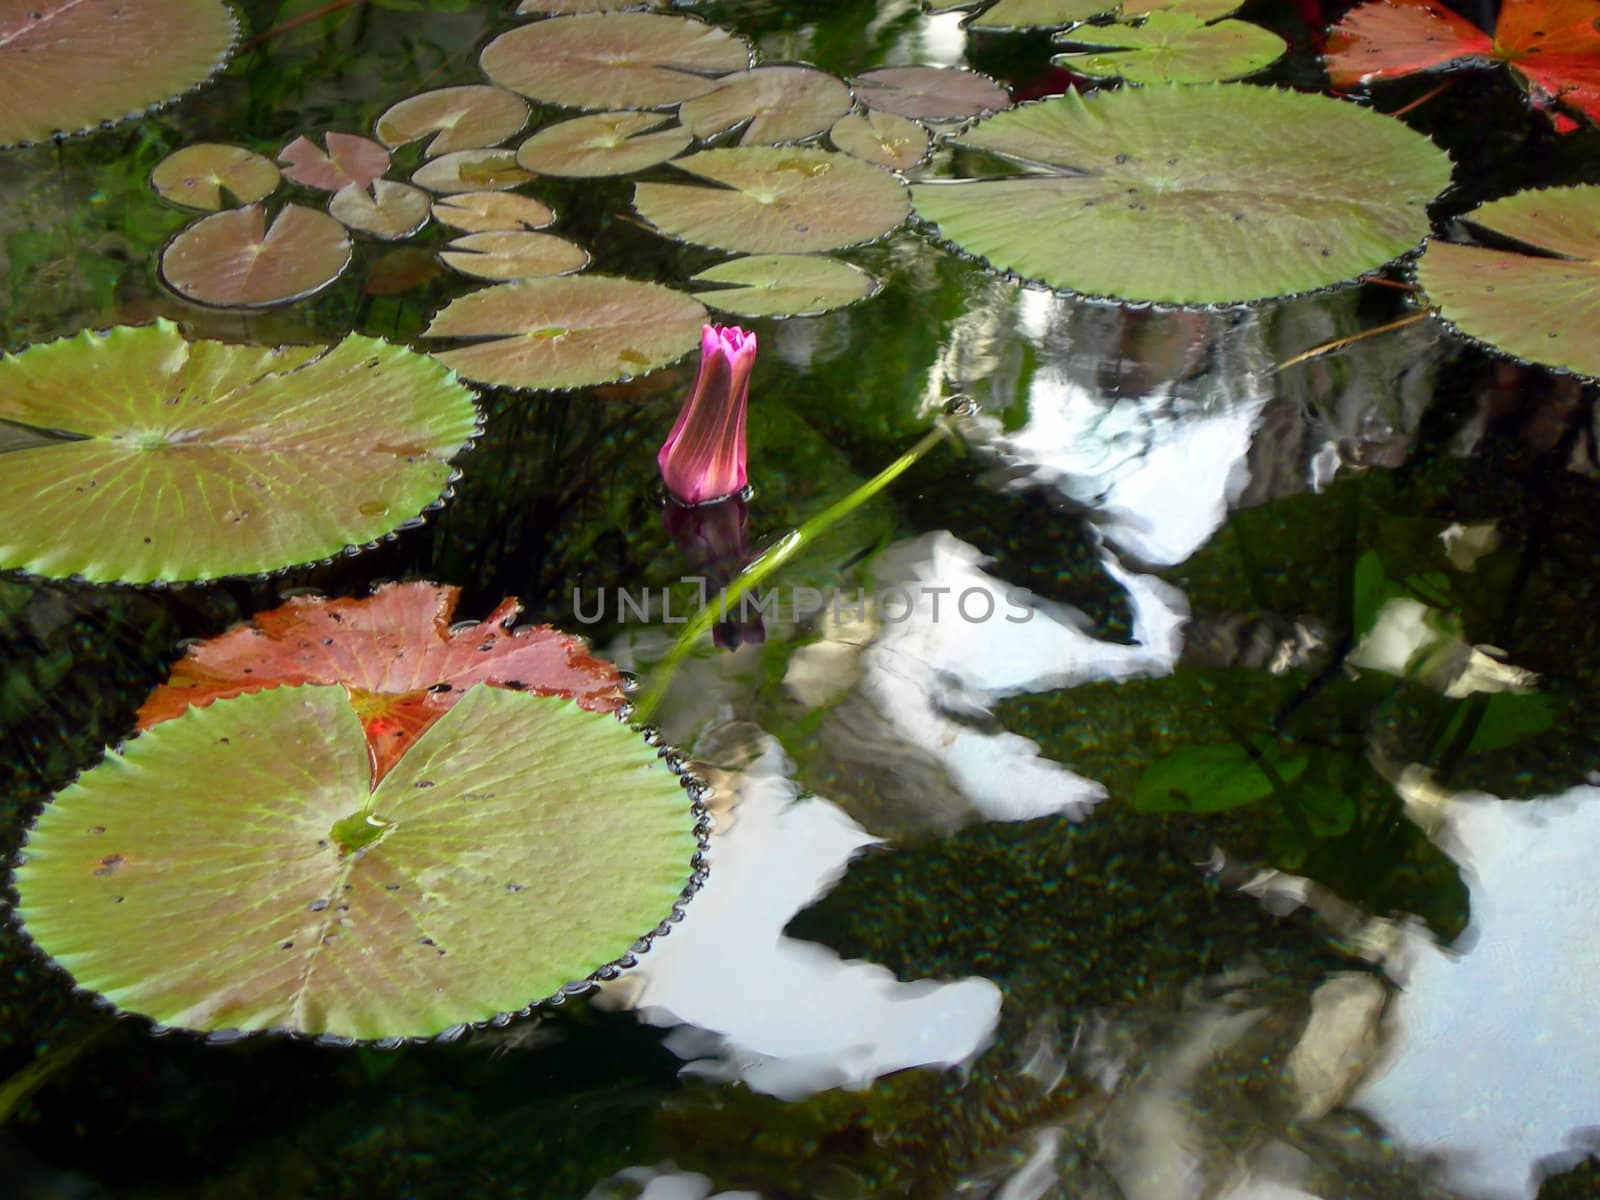 Exotic water lilly pads in the pond 